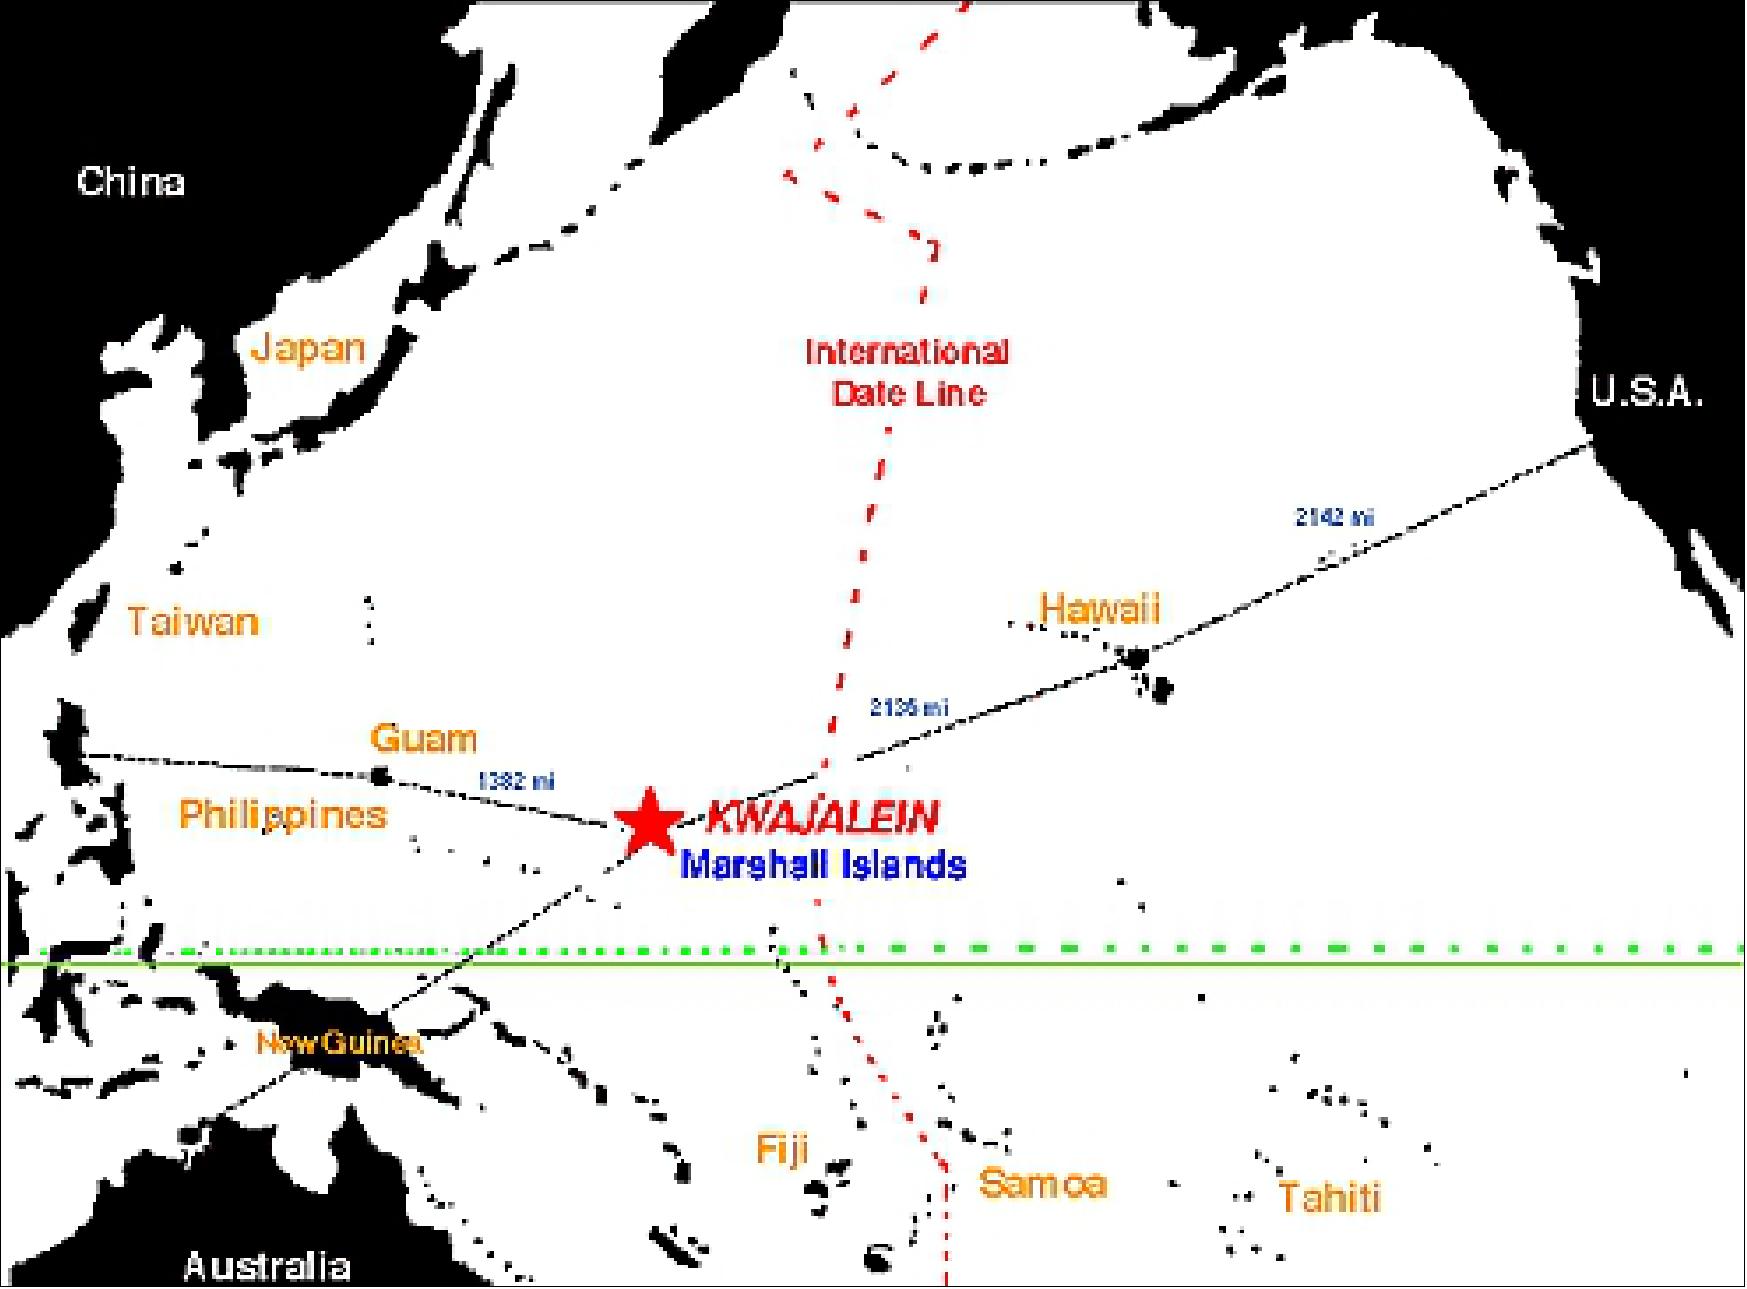 Figure 21: Location of the Kwajalein Atoll for Sensor Site 1 (image credit: US Army Reagan Test Site Media)